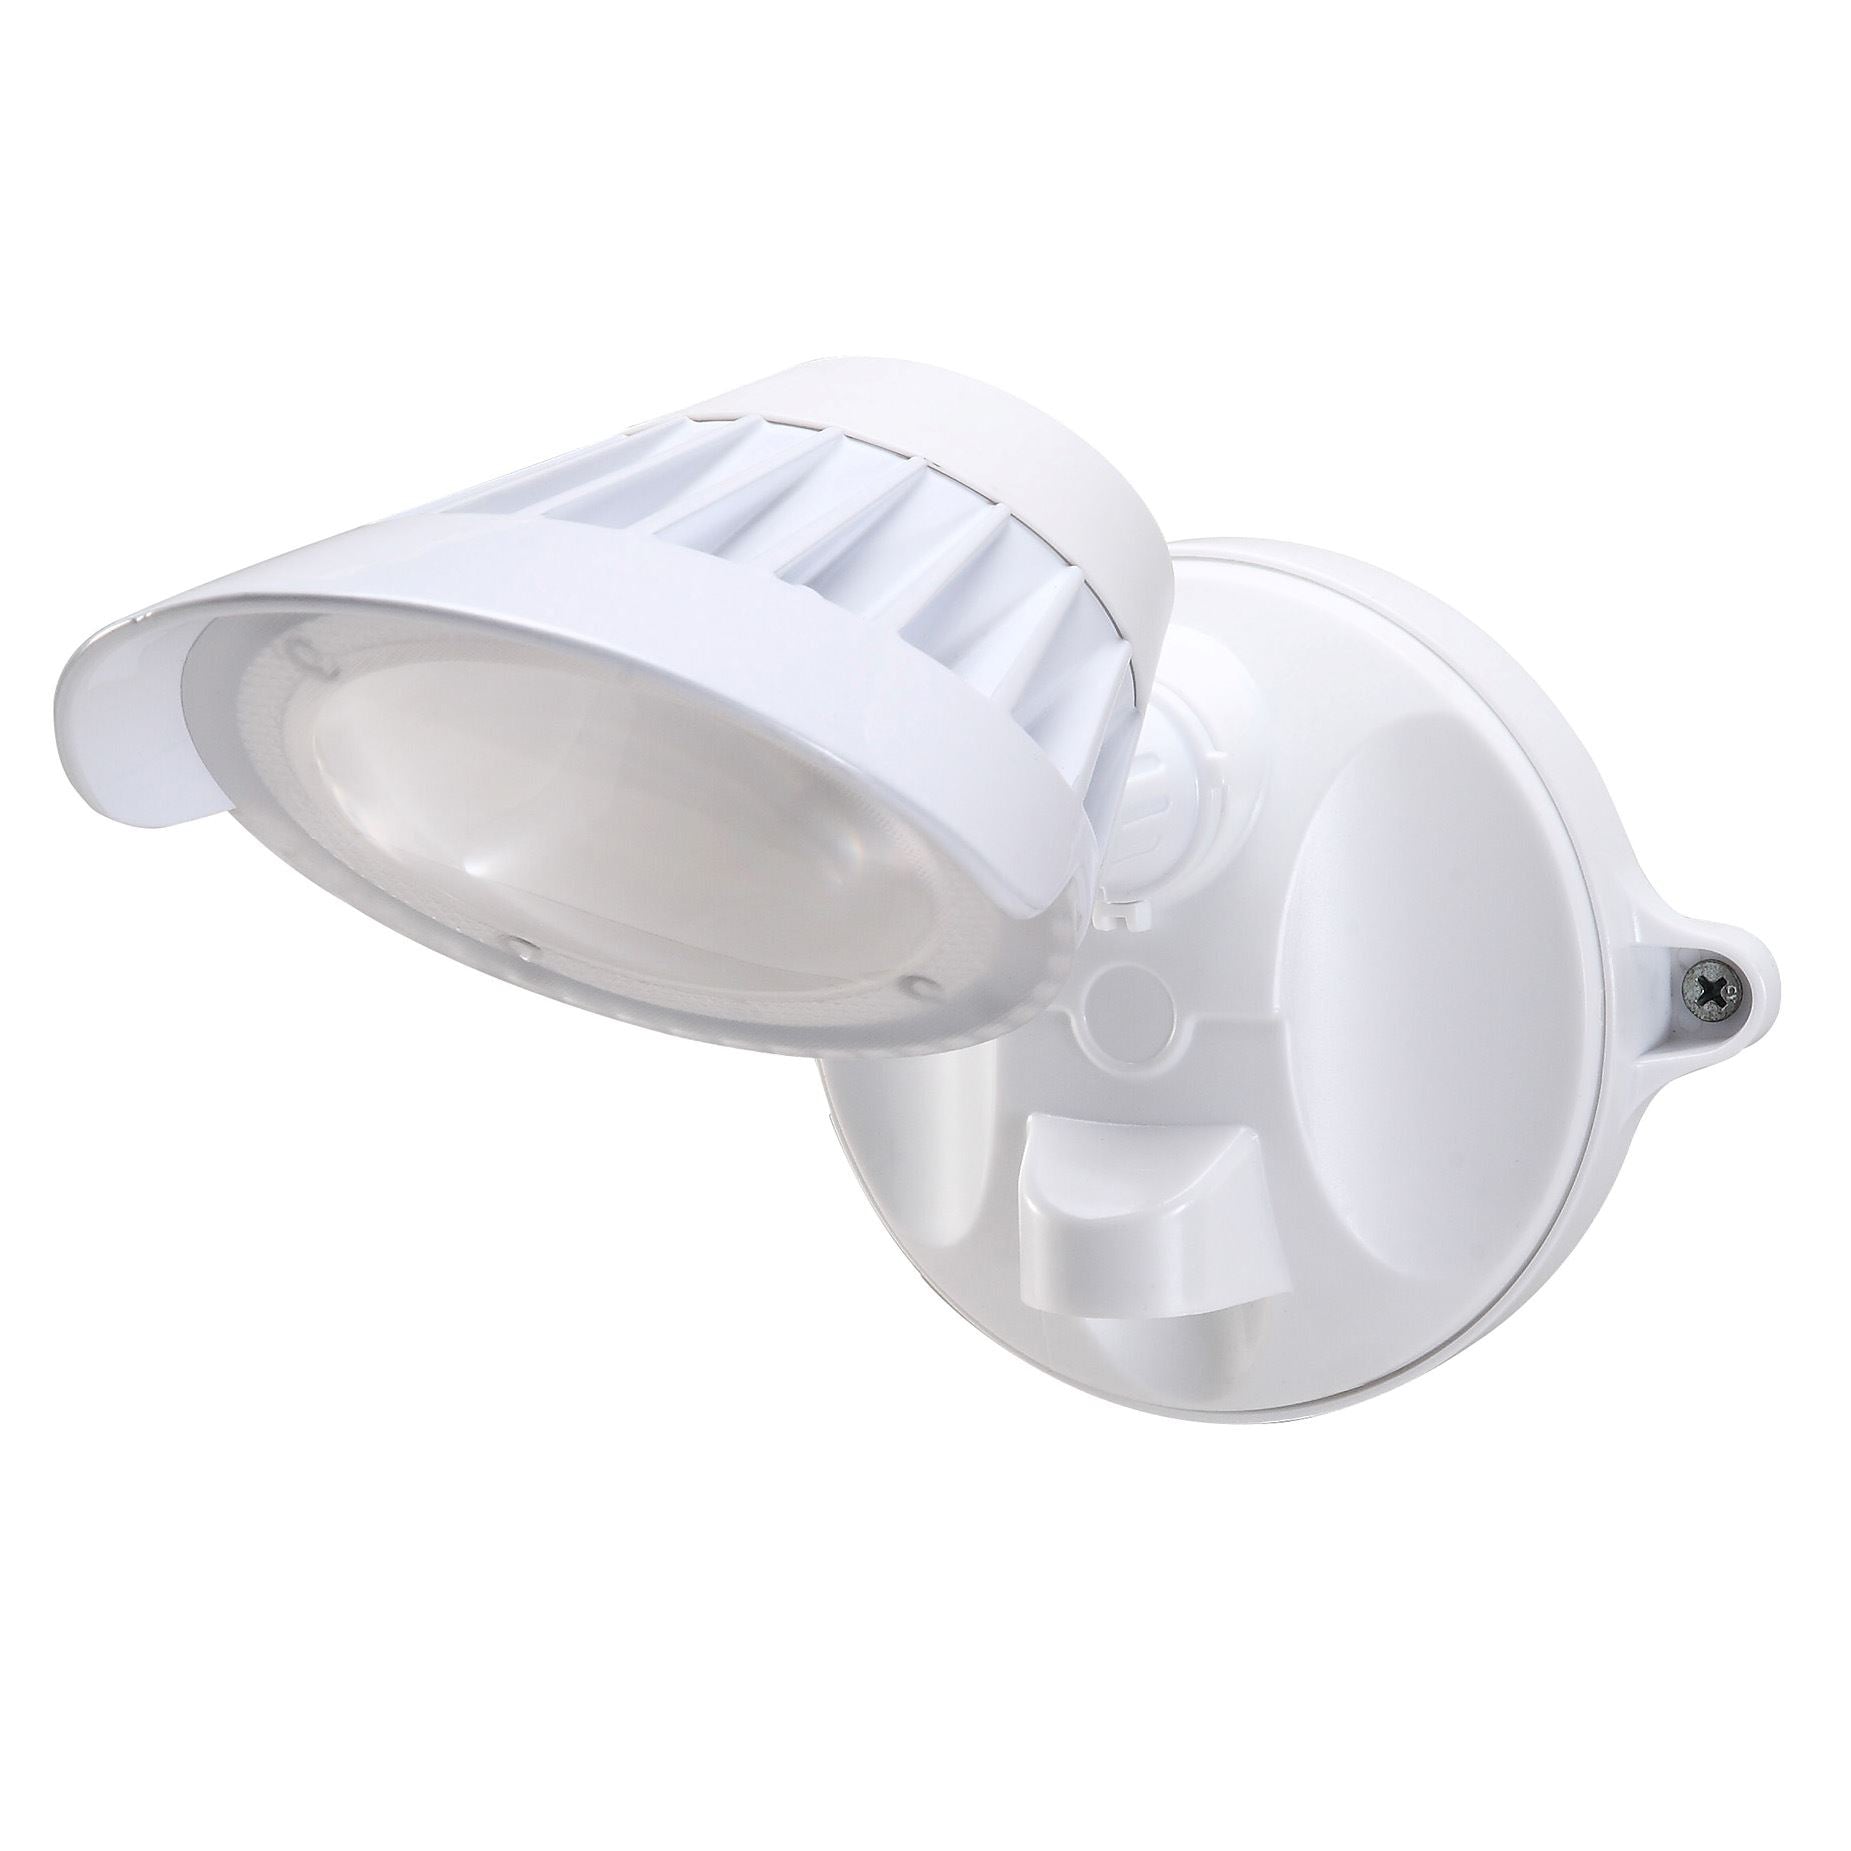 HOUSEWATCH_20W_Single_LED_Spotlight_IP54._2000_Lumens._Includes_Stainless_Steel_Screws._Colour_Temperature_5000K._White_Colour.